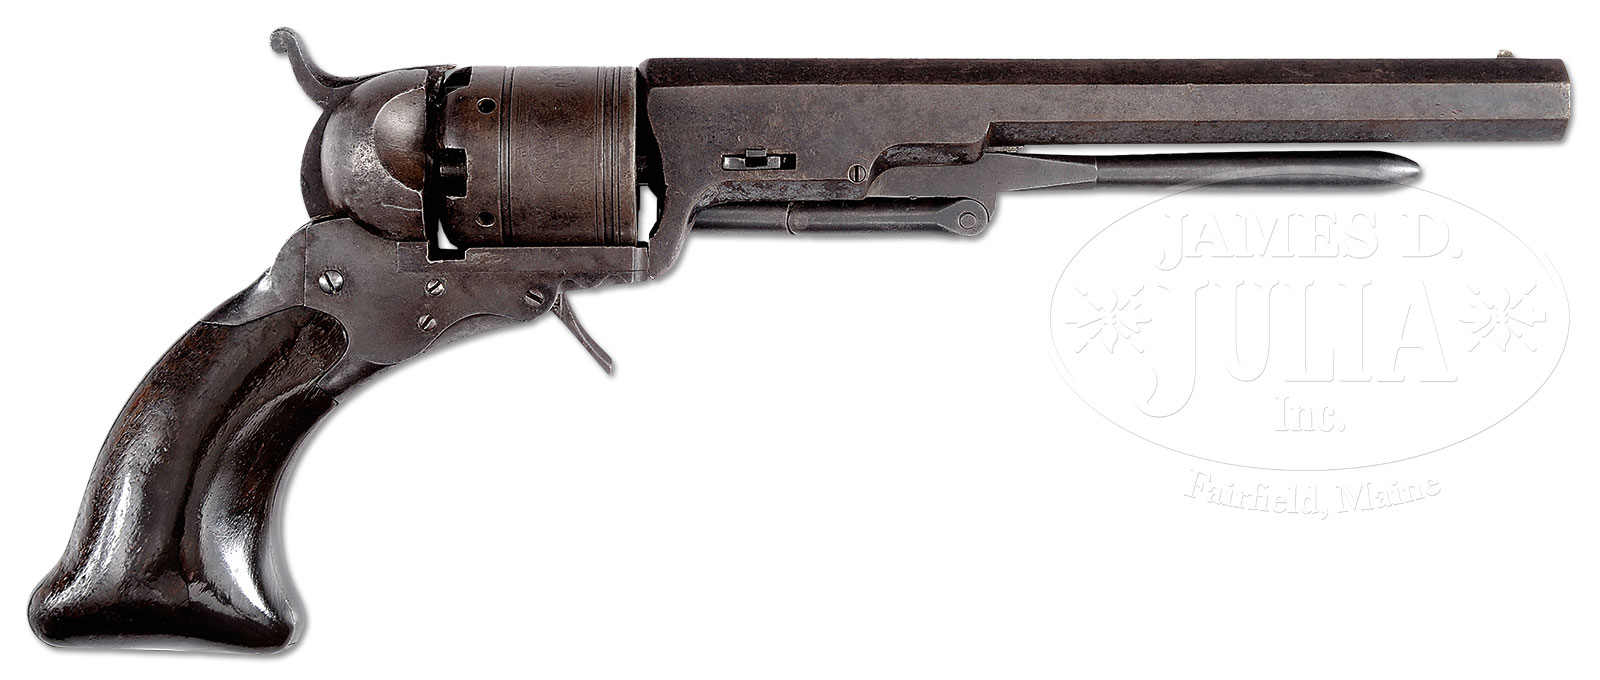 VERY RARE COLT PATERSON NO. 5 TEXAS HOLSTER MODEL PERCUSSION REVOLVER WITH ATTACHED RAMMER.